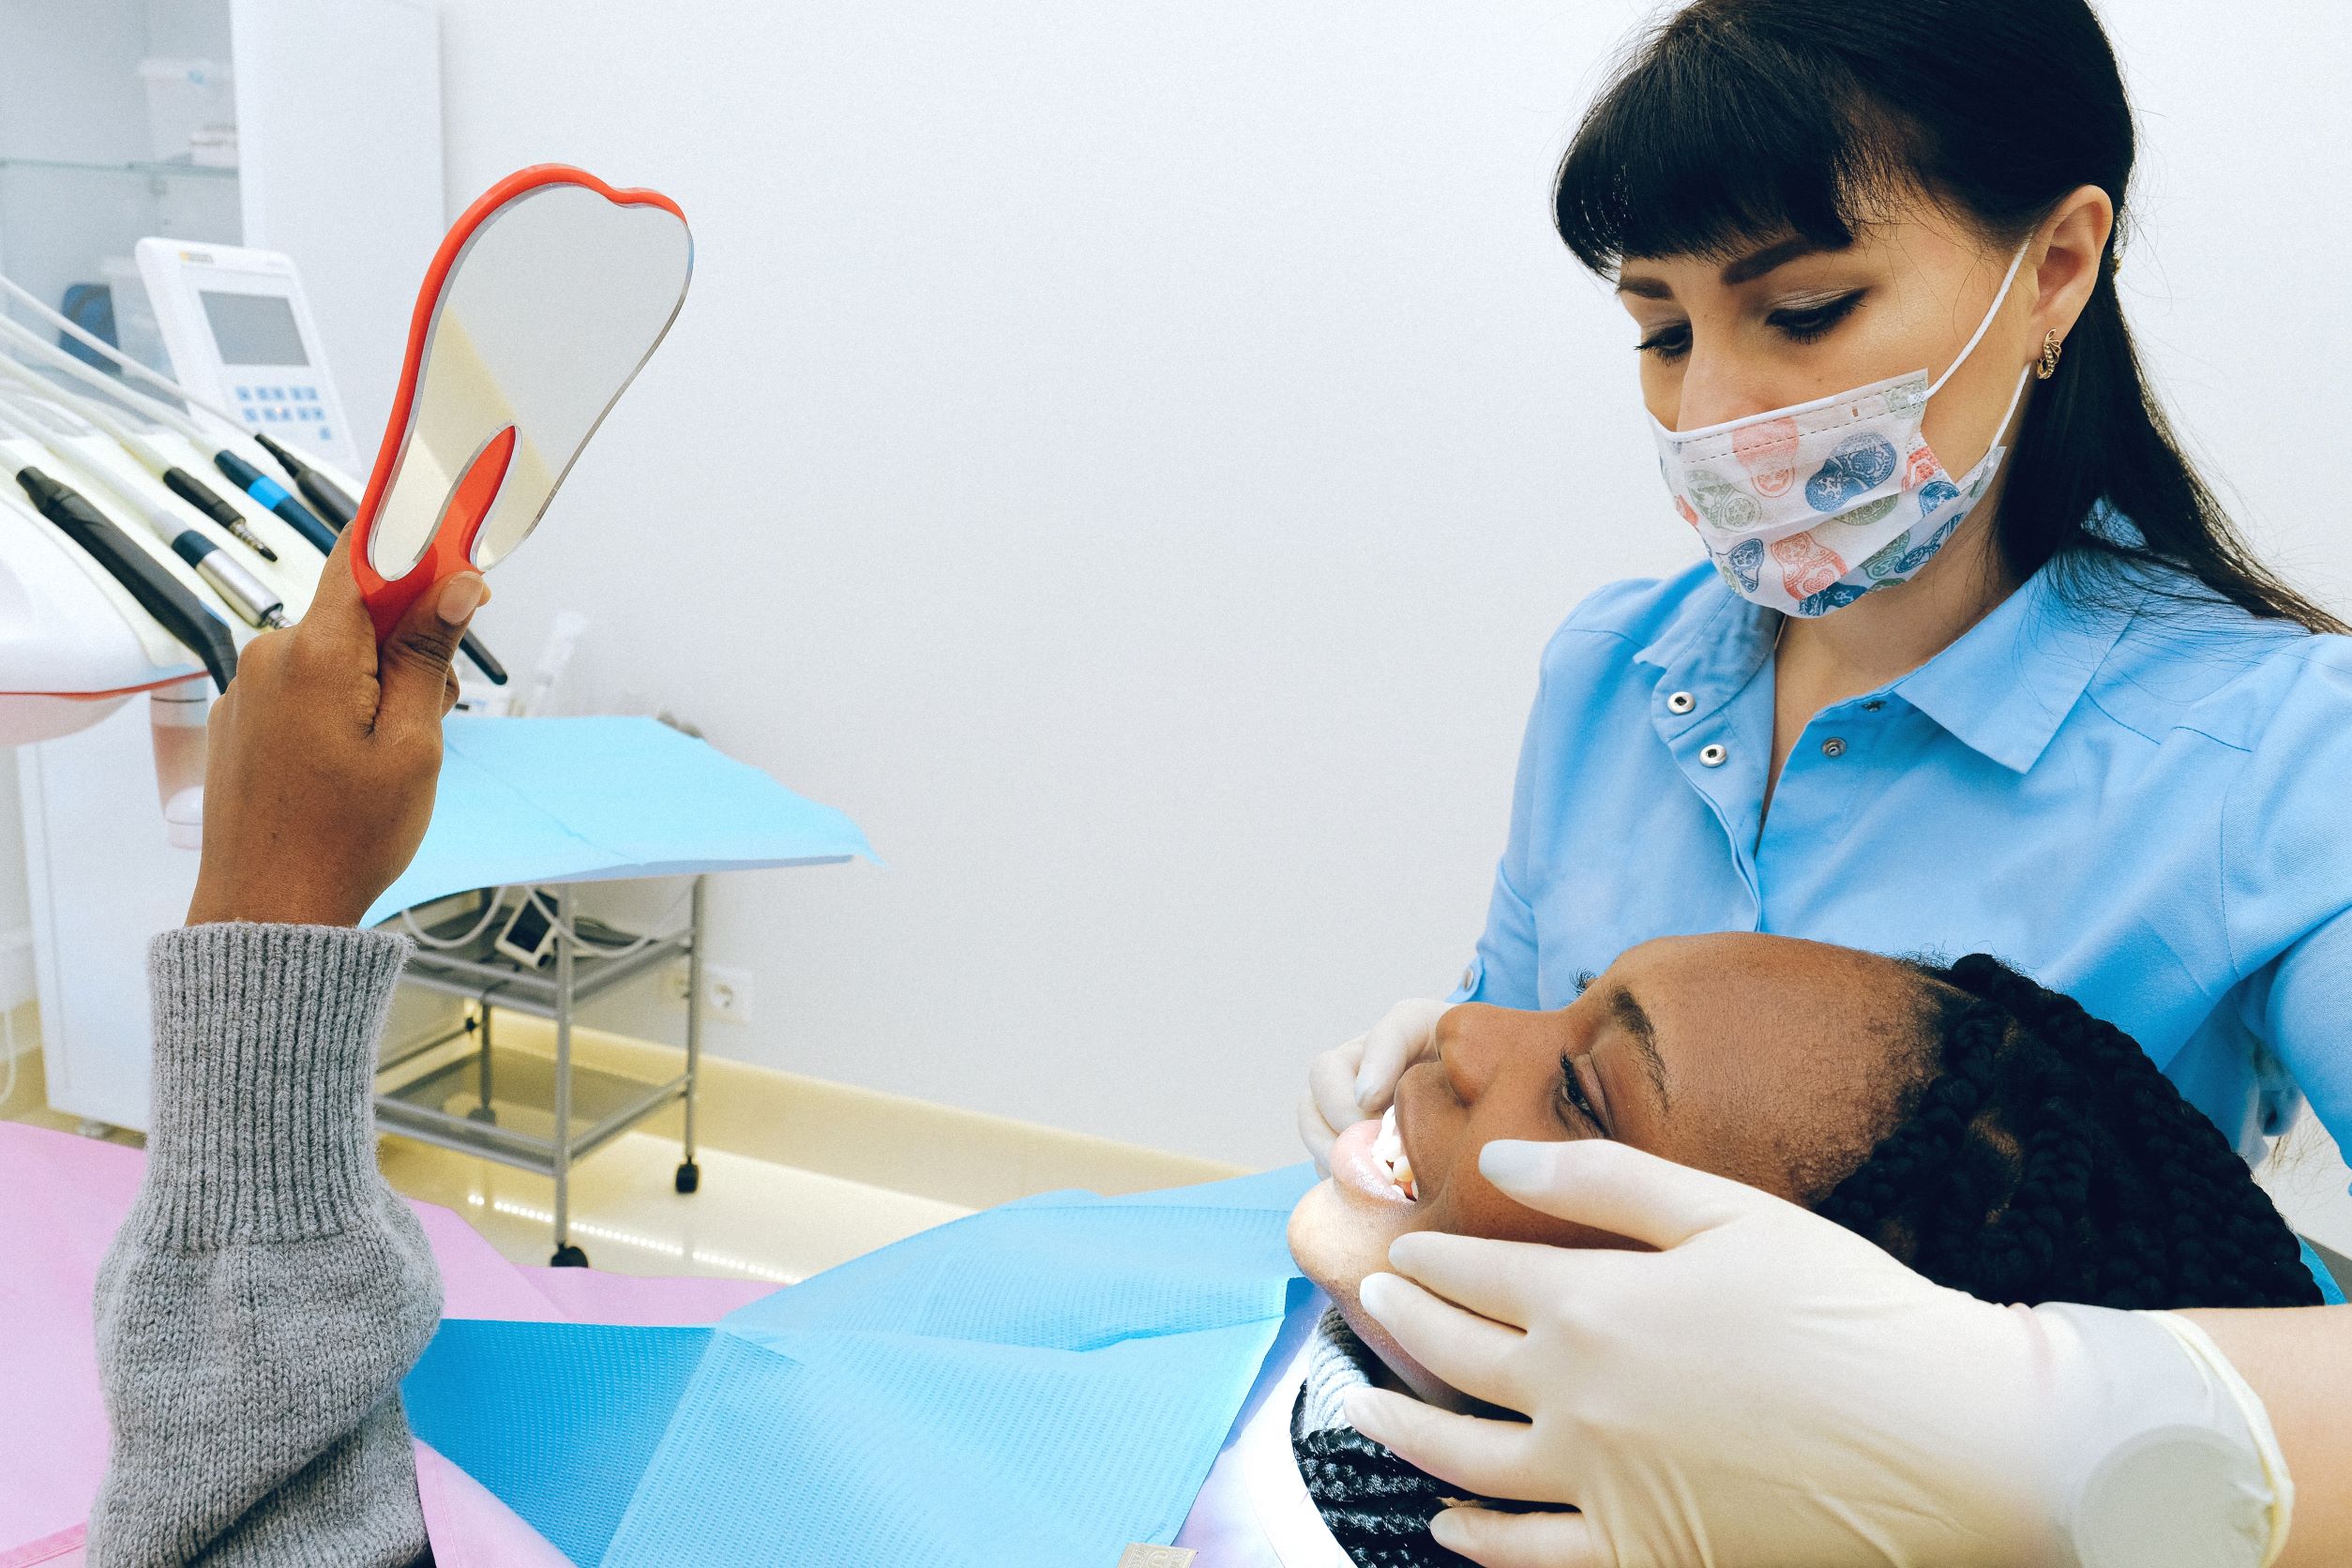 A dental professional in protective gear practices infection control dentistry